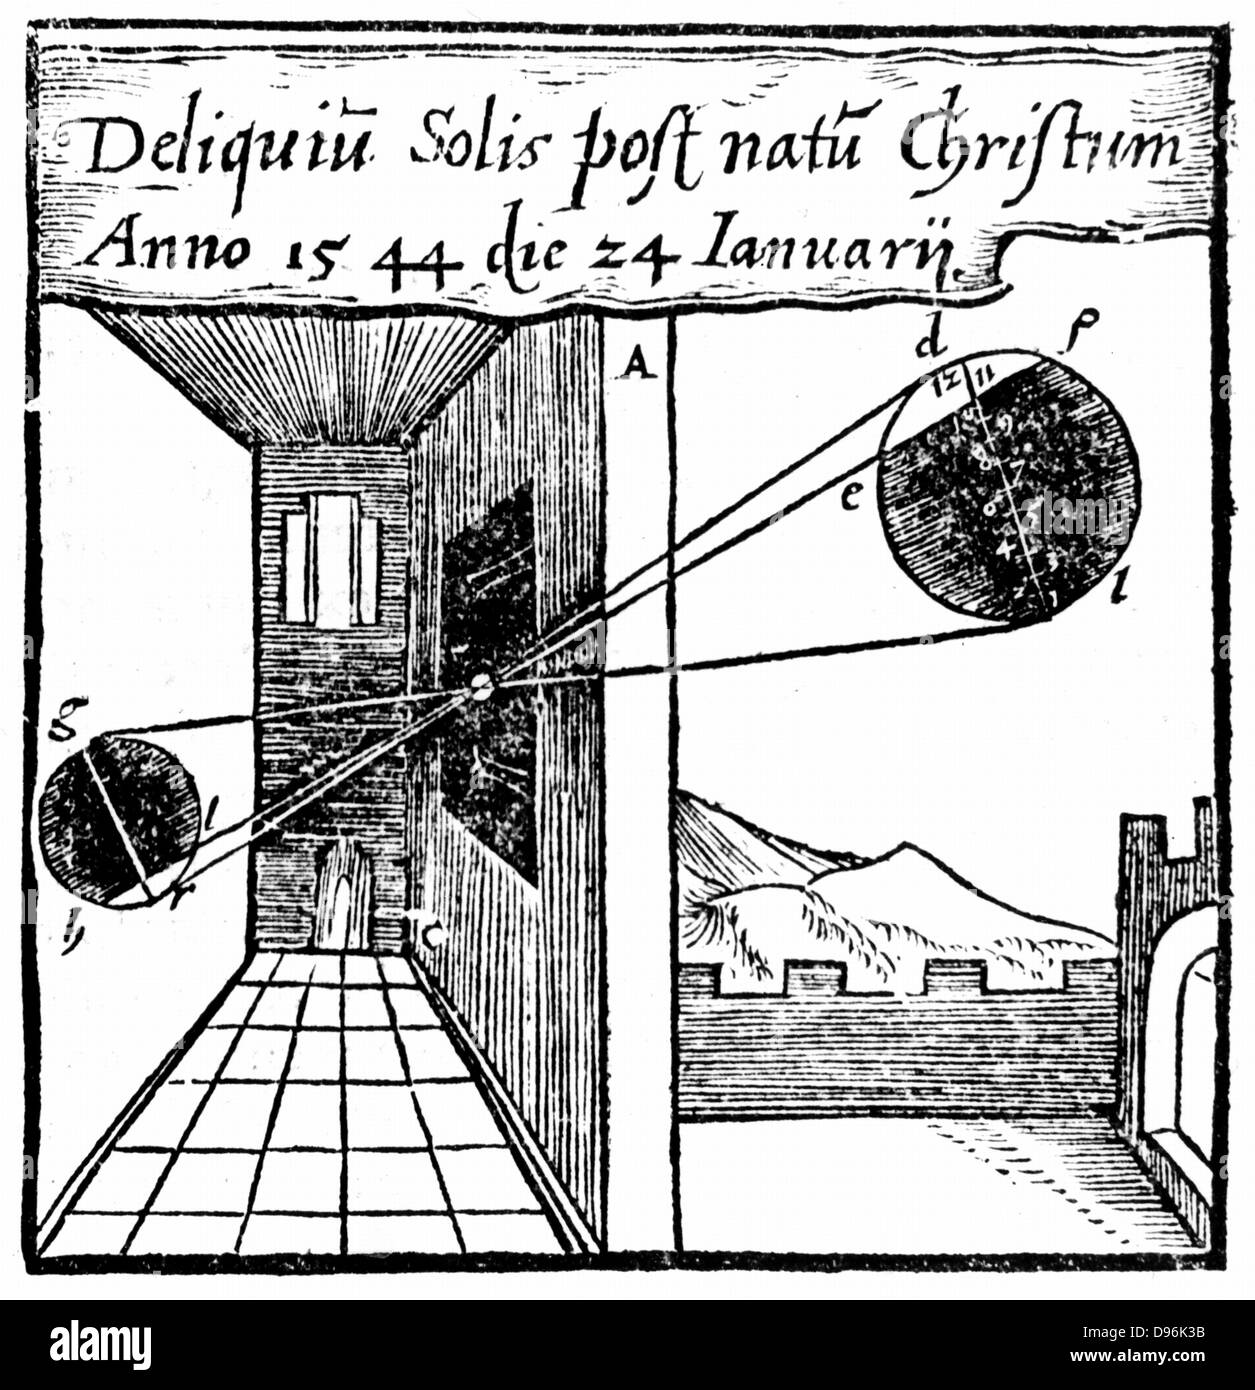 Camera obscura: projecting a solar eclipse into a darkened room through a small hole, showing how the image is inverted. From Daniele Santbech 'Problematum Astronomicorum' Basle, 1561 Stock Photo